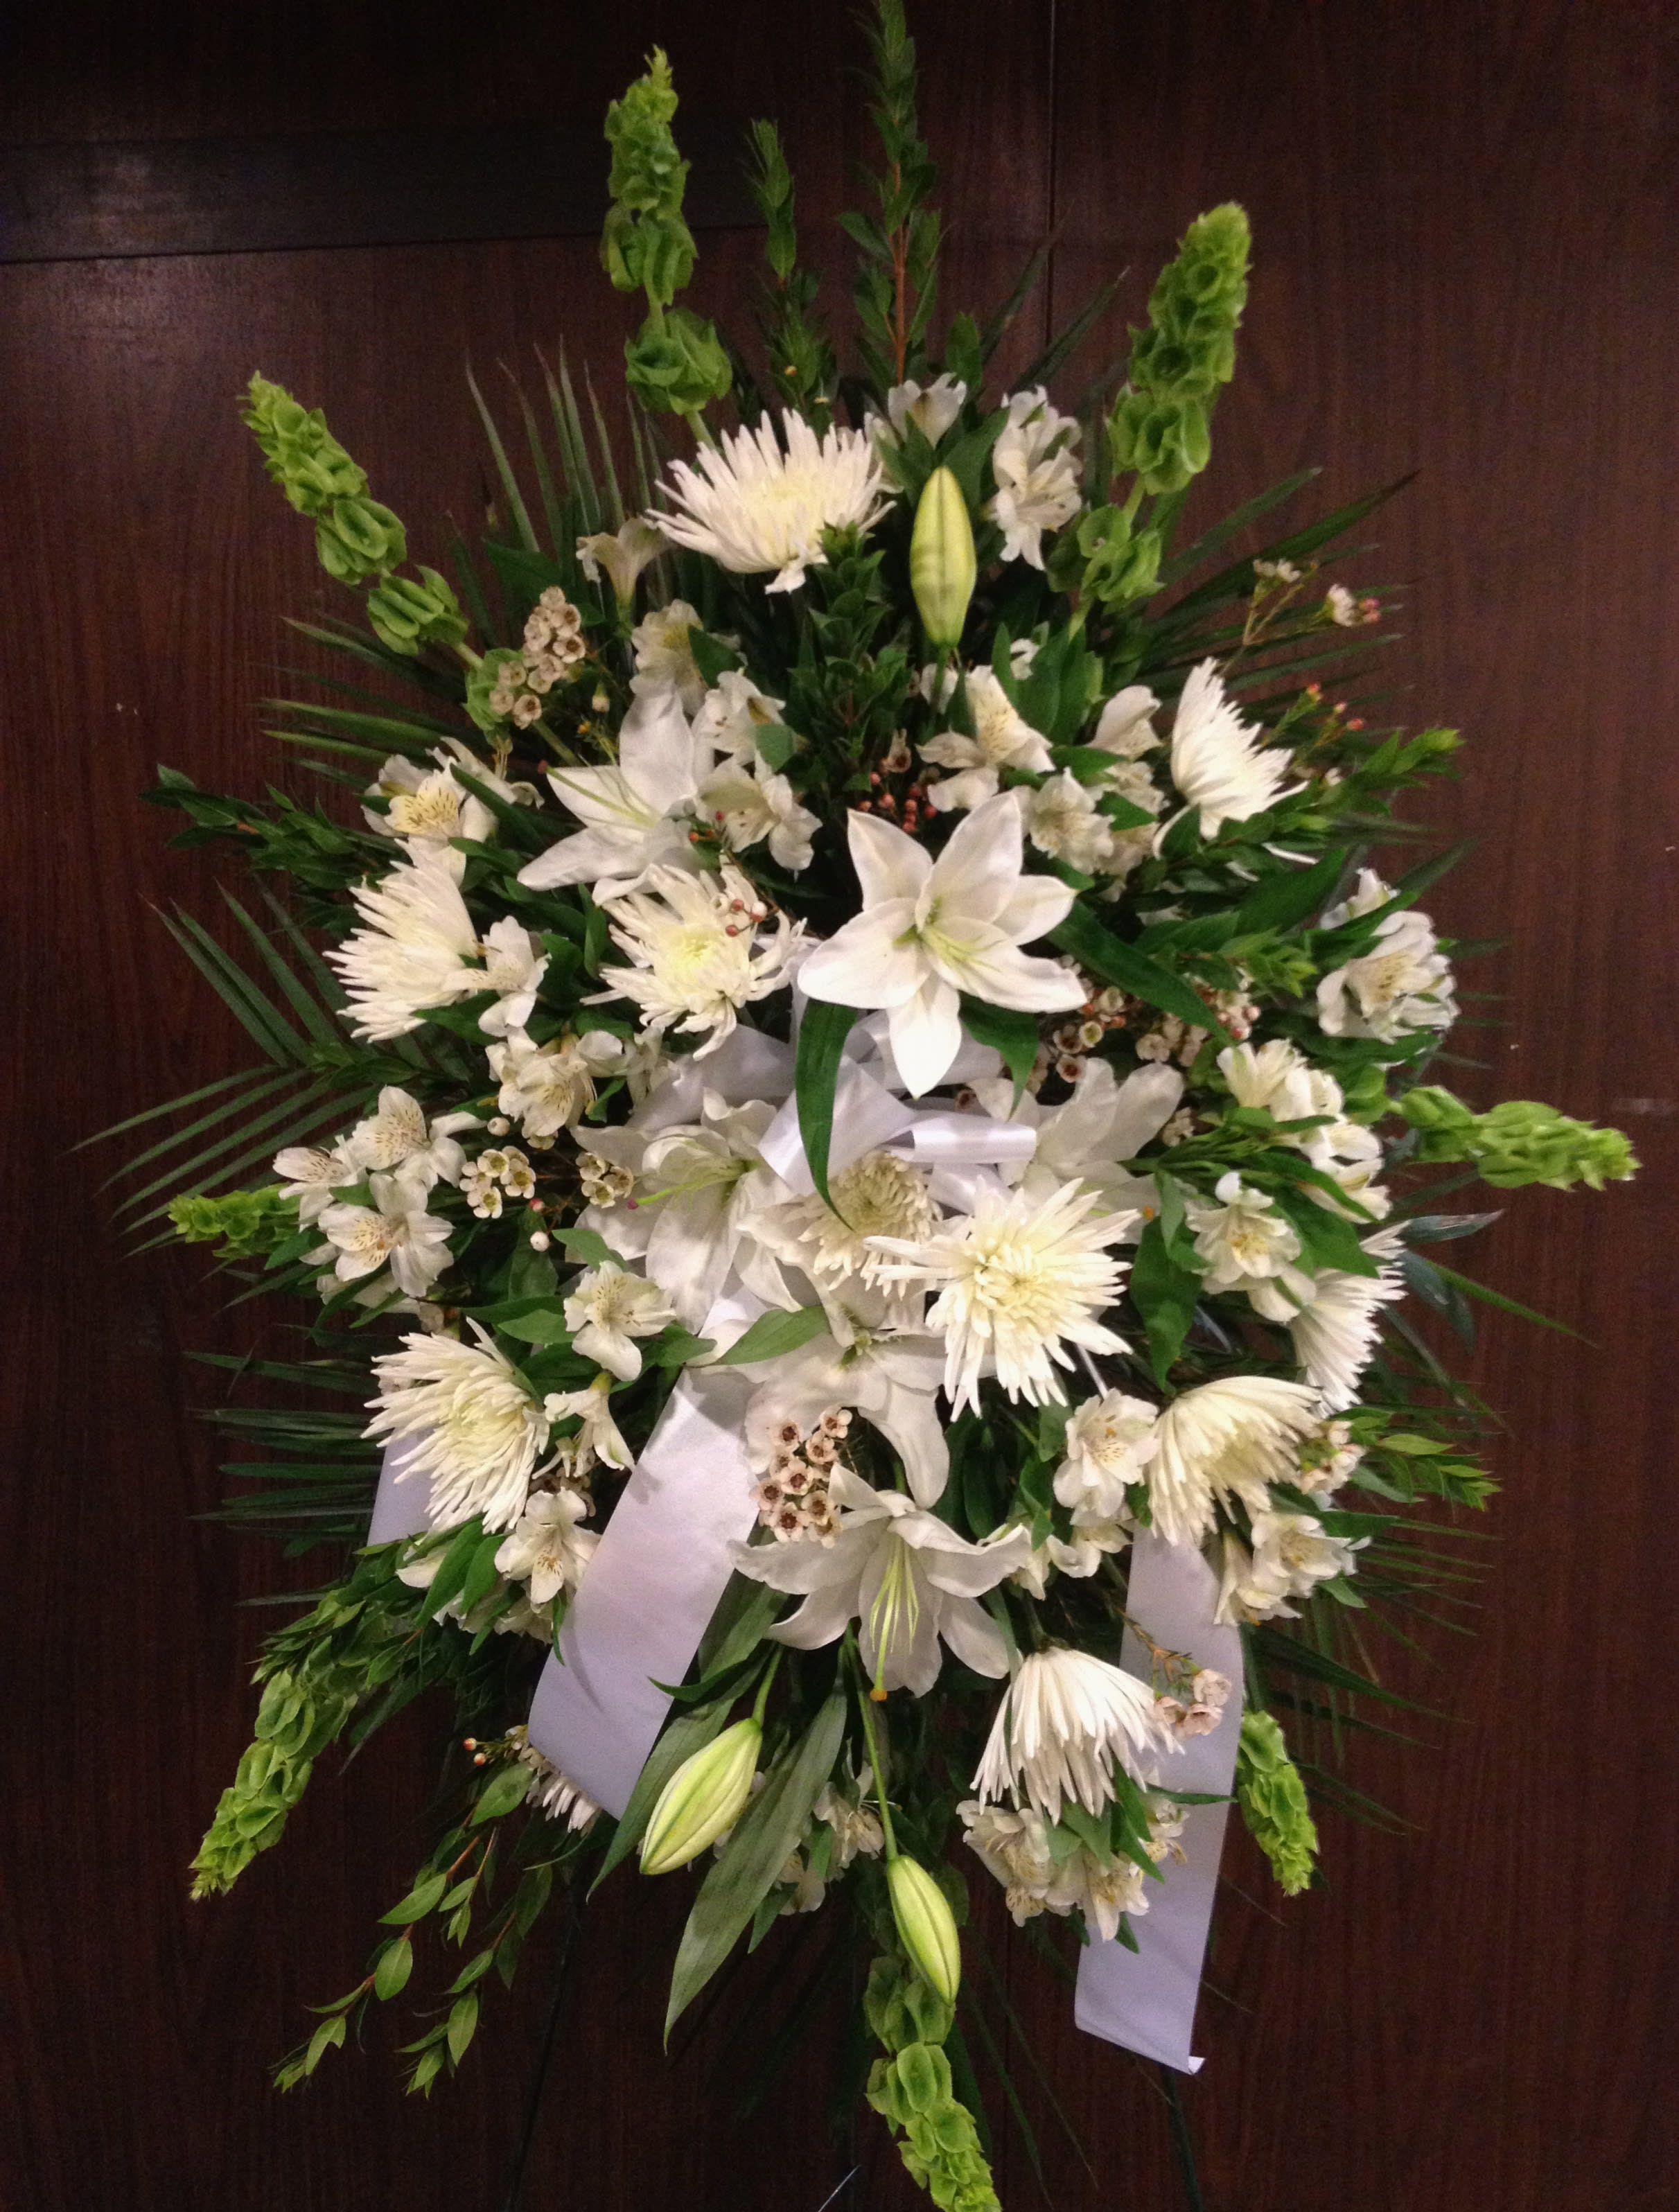 White and Green standing Spray  - To send sympathy flowers is a testament of your love and devotion. This serene standing spray with white and green lovely flowers such as lilies, chrysanthemums and alstroemeria.  